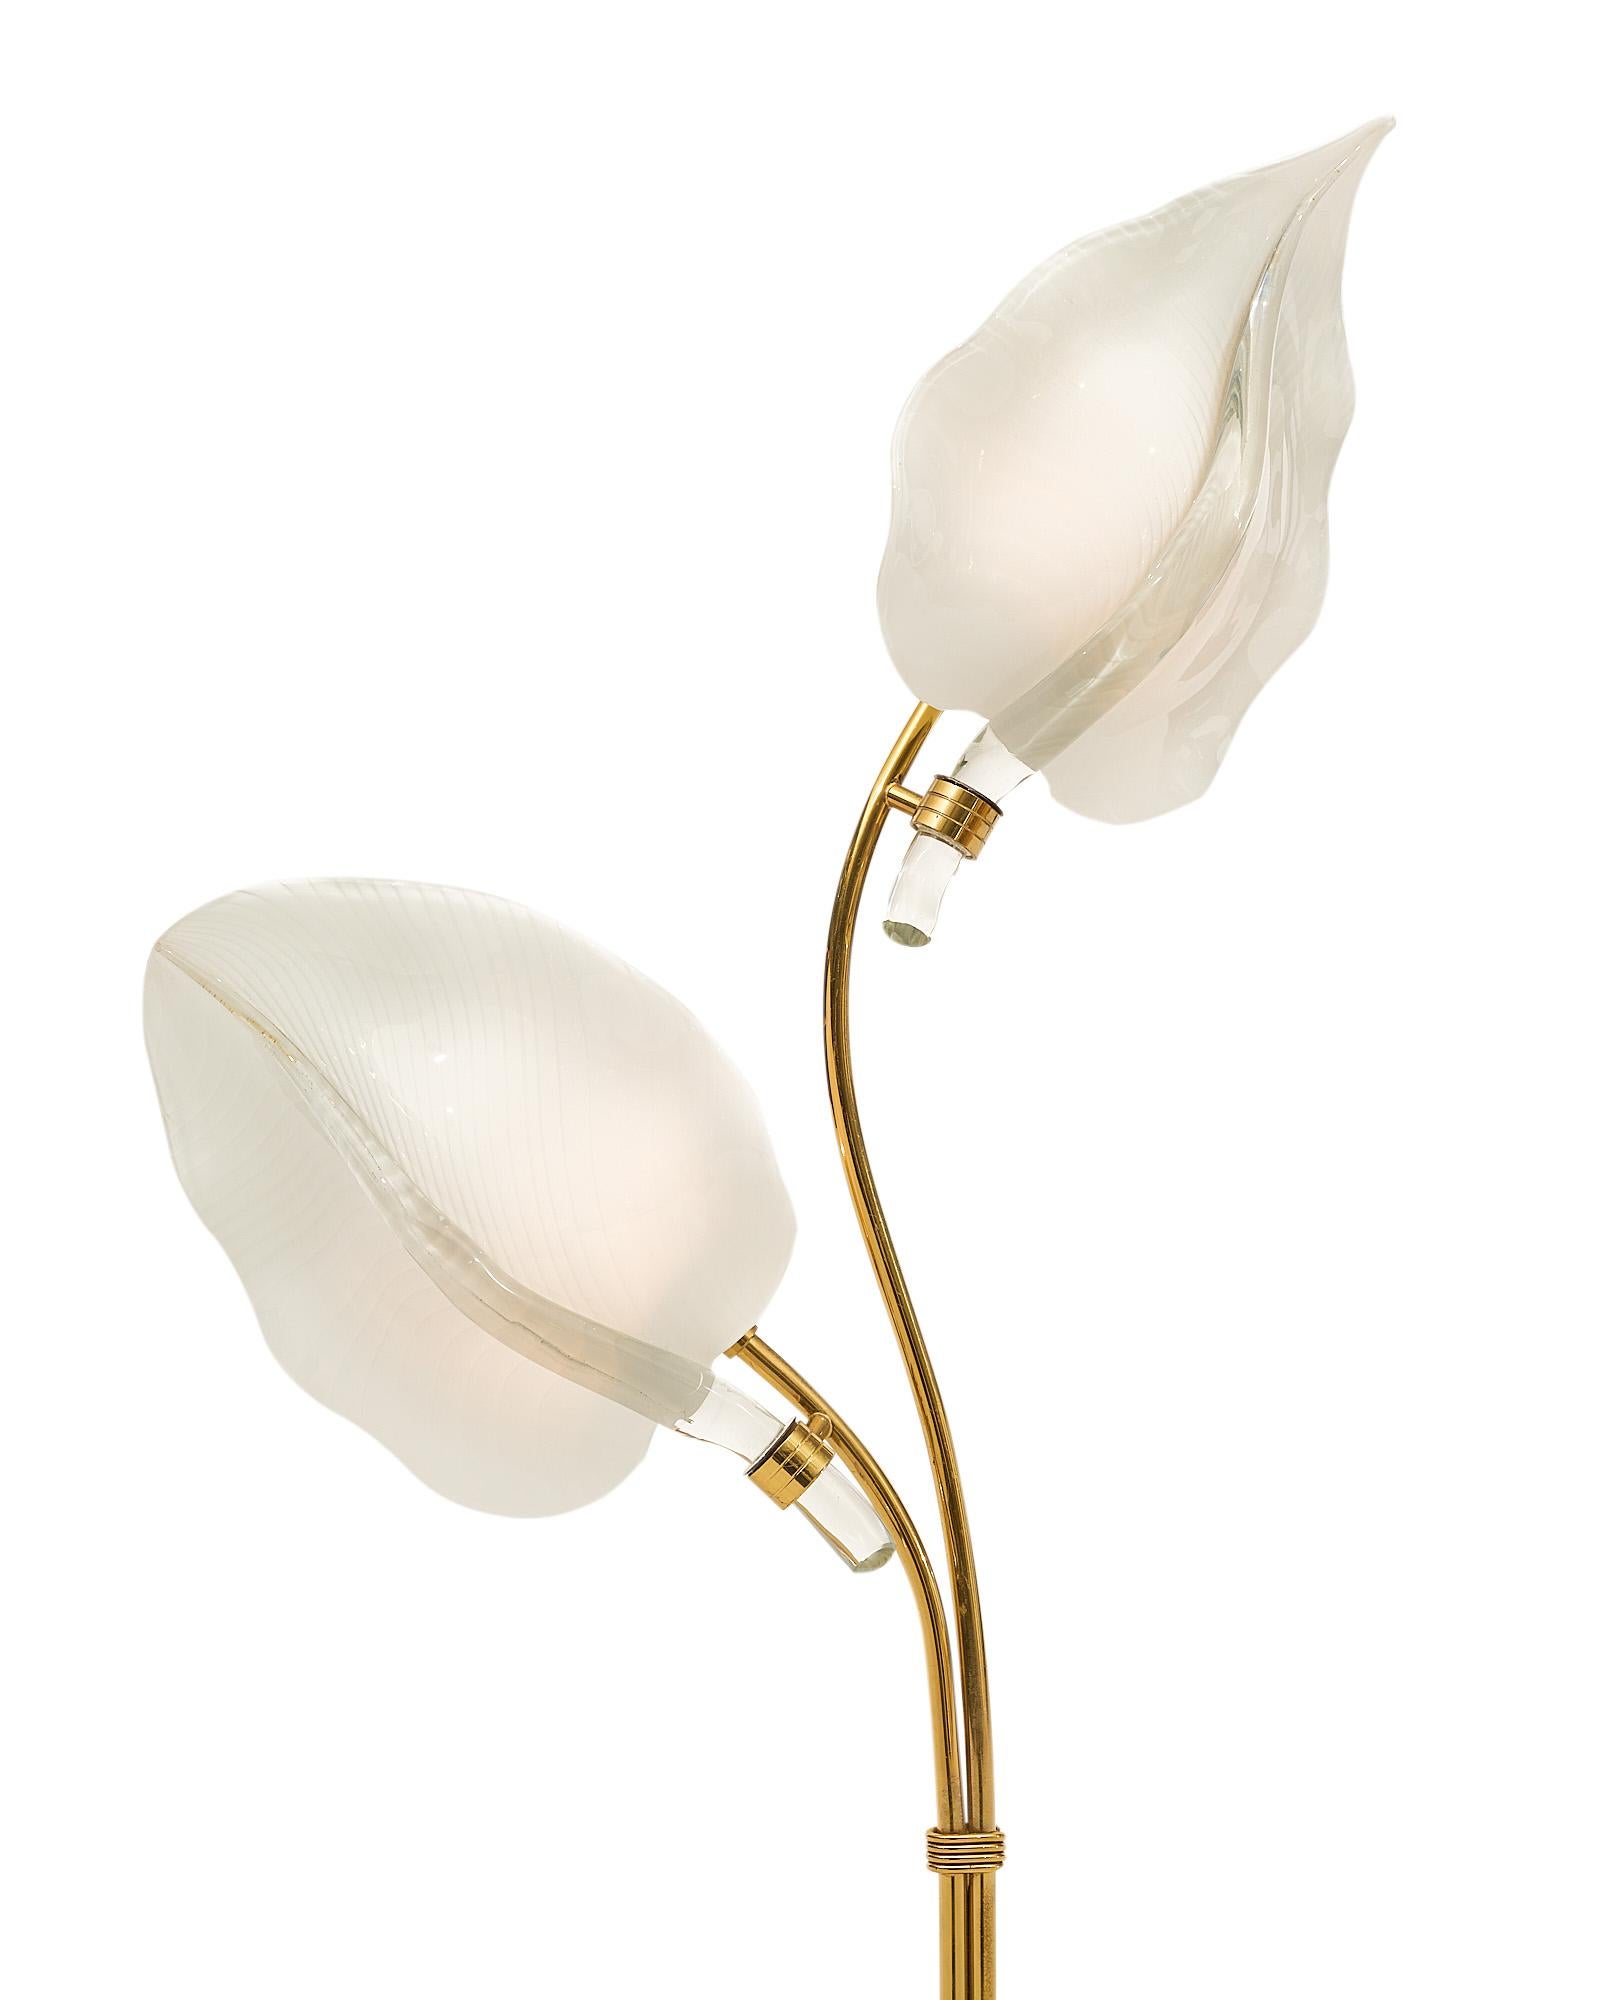 Floor lamp, Italian, the stem is brass, two large Murano glass leaves are featured hiding sockets and two bulbs. One of the leaves has been professionally restored. It has been newly wired to fit US standards.